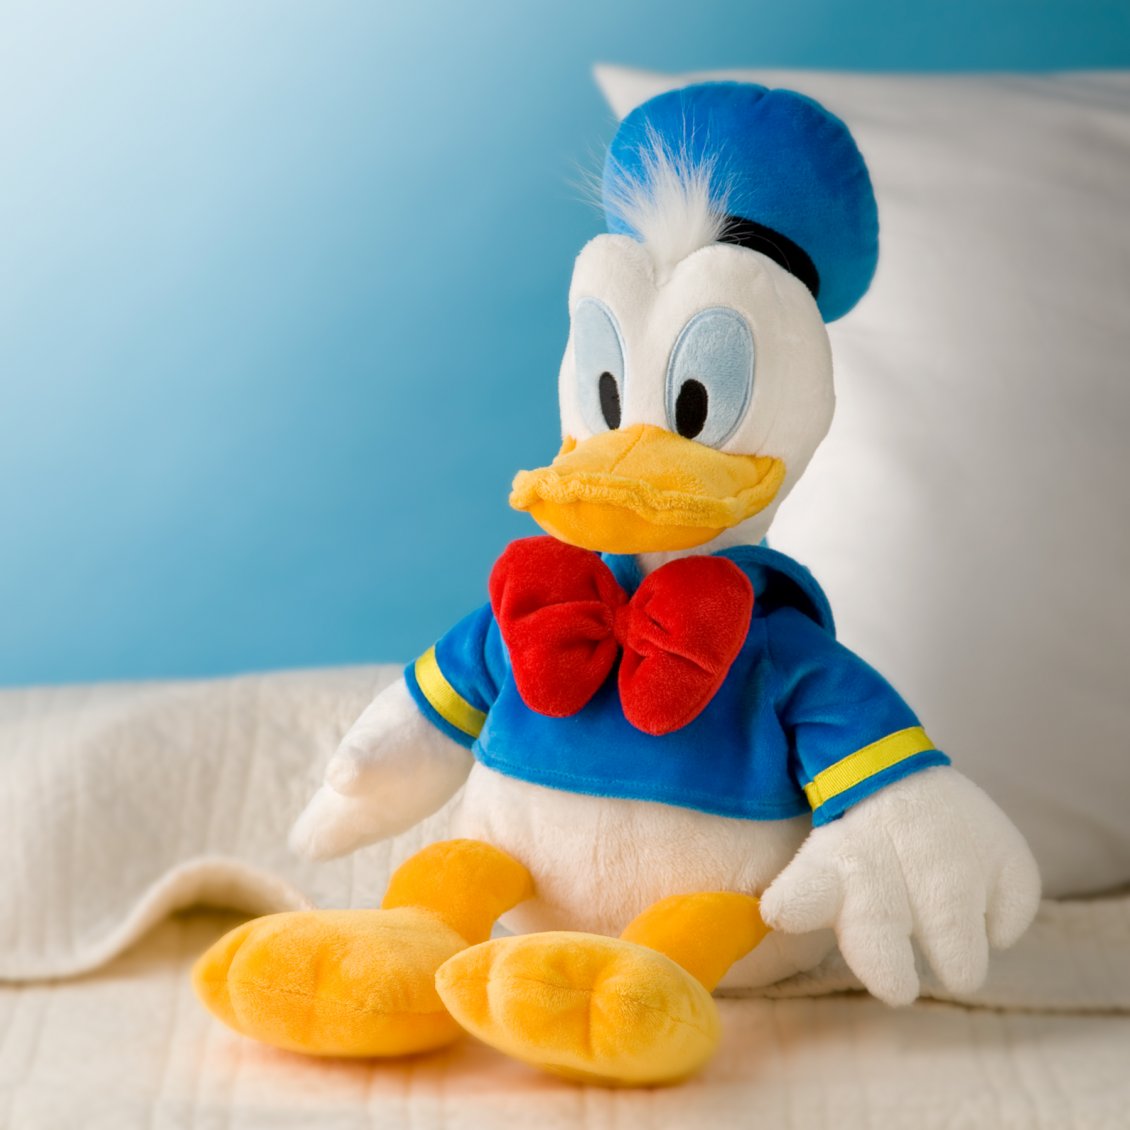 Download Wallpaper Donald Duck, plush toy on the sofa